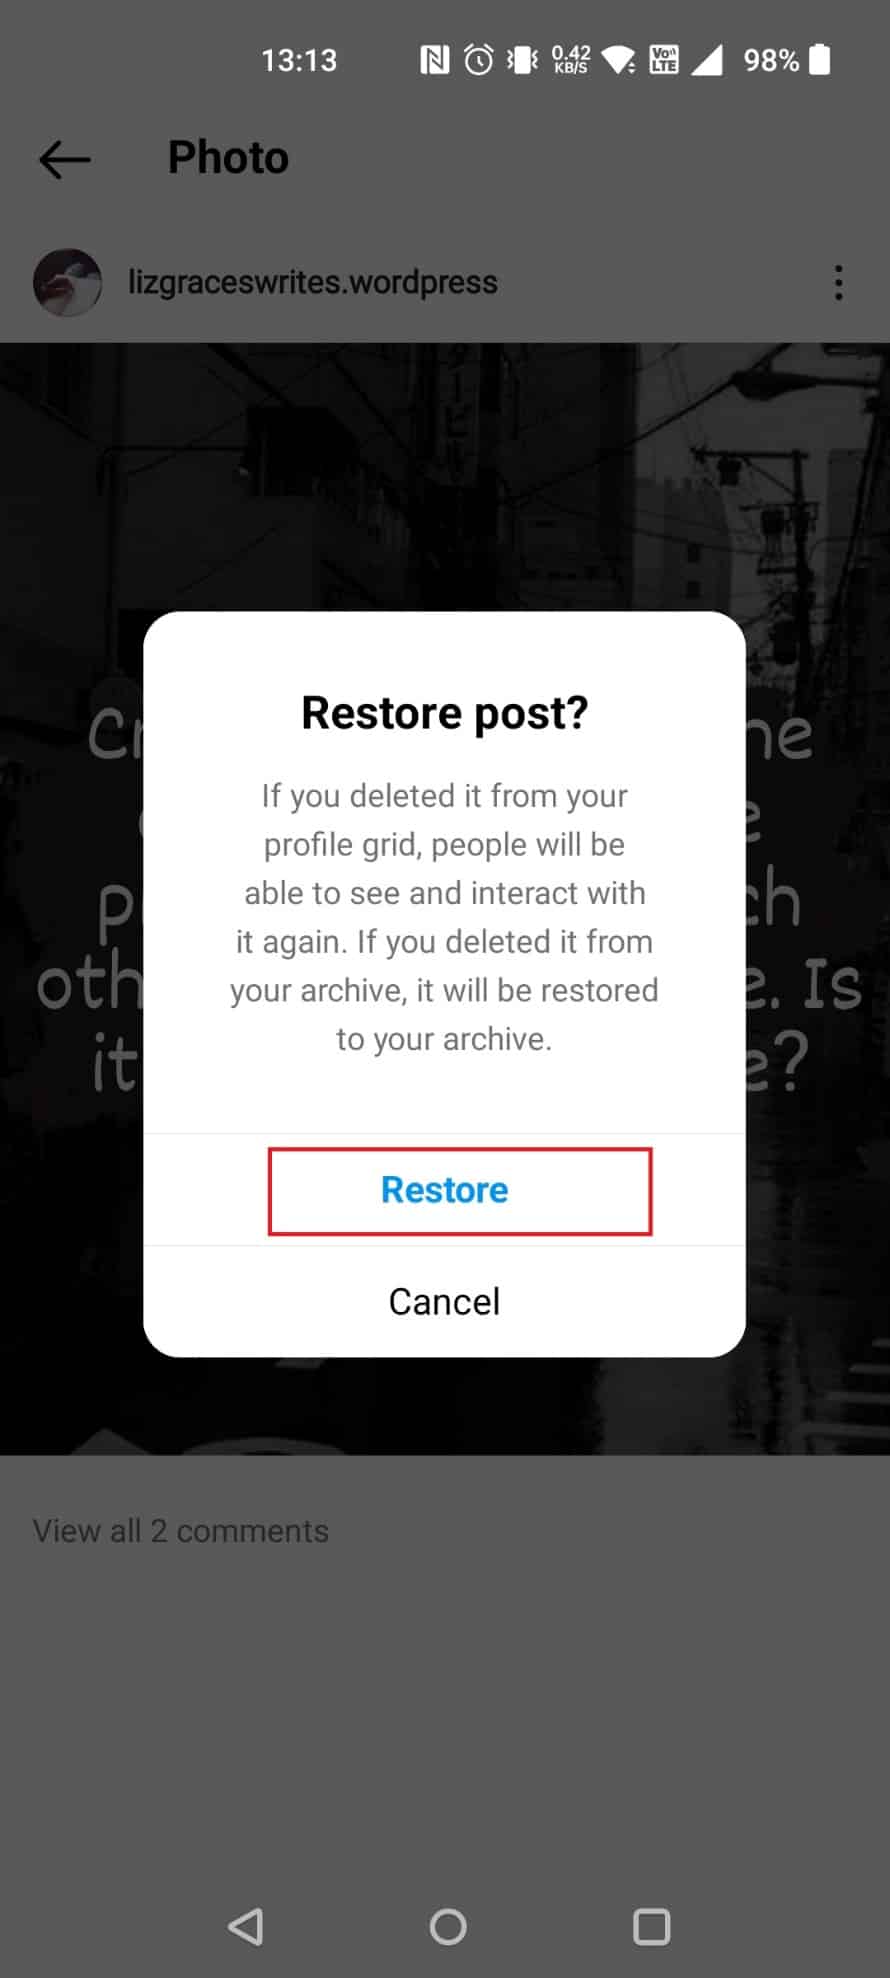 tap on Restore in the pop-up